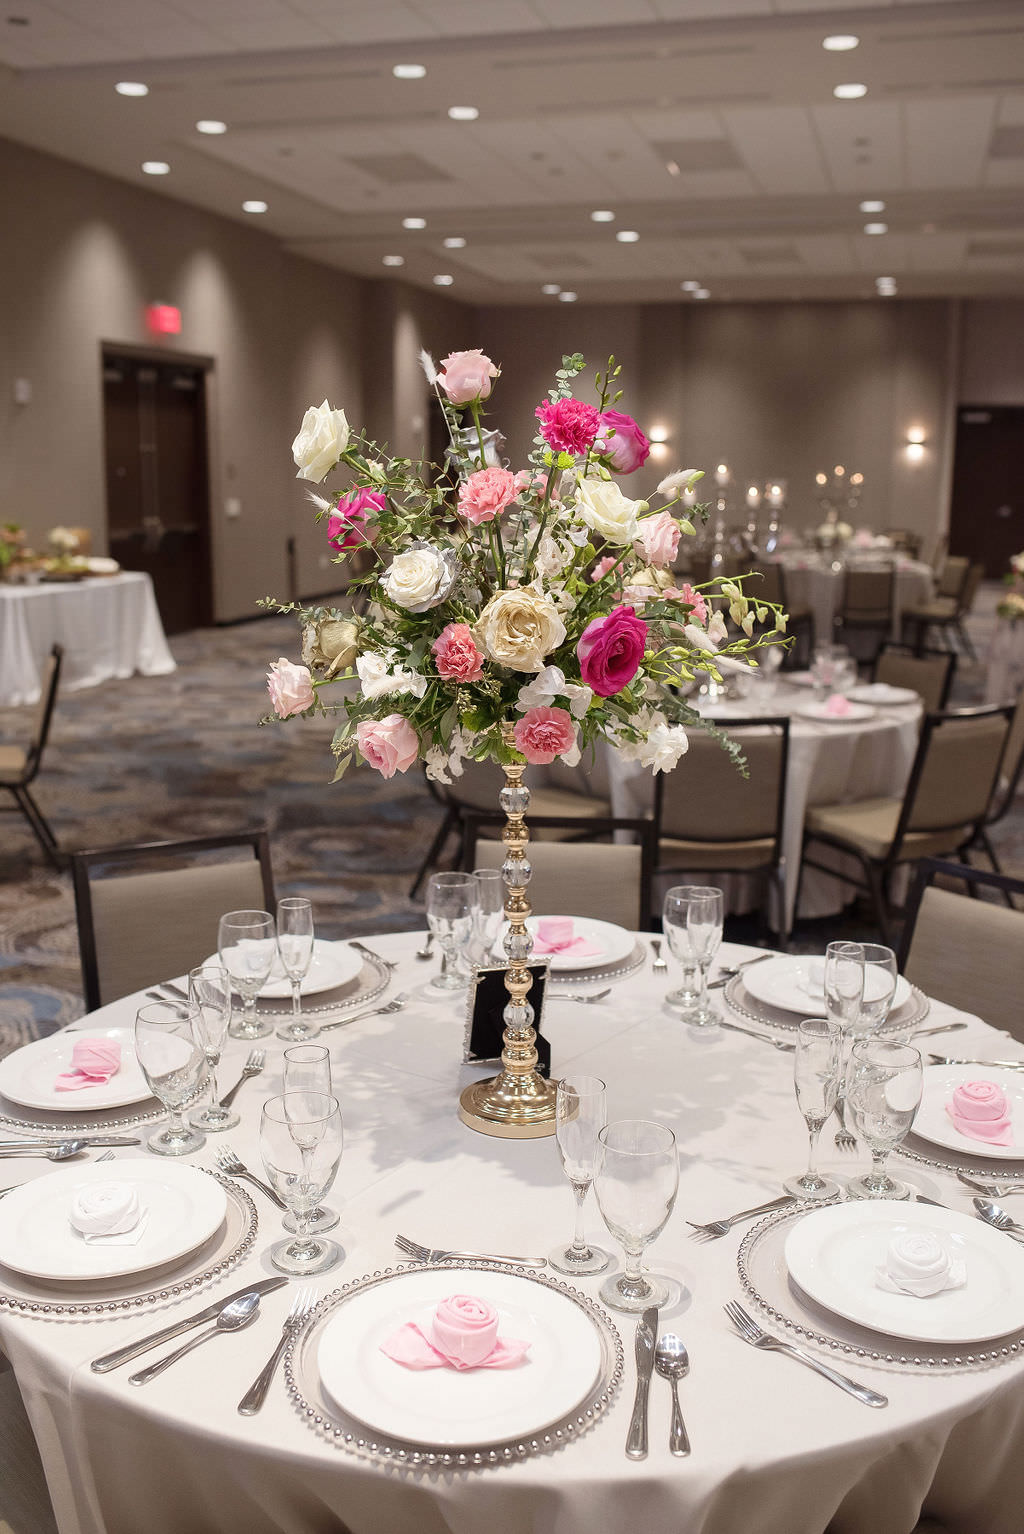 Colorful Ballroom Wedding Reception Decor, Round Tables with Gray Linens, Tall Candlestick with Fuchsia Pink, Blush Pink, Ivory Roses and Greenery Floral Centerpiece | Tampa Bay Wedding Photographer Kristen Marie Photography | Hotel Wedding Venue Hyatt Place Downtown St. Pete | Wedding Florist Brides N Blooms | Outside the Box Event Rentals